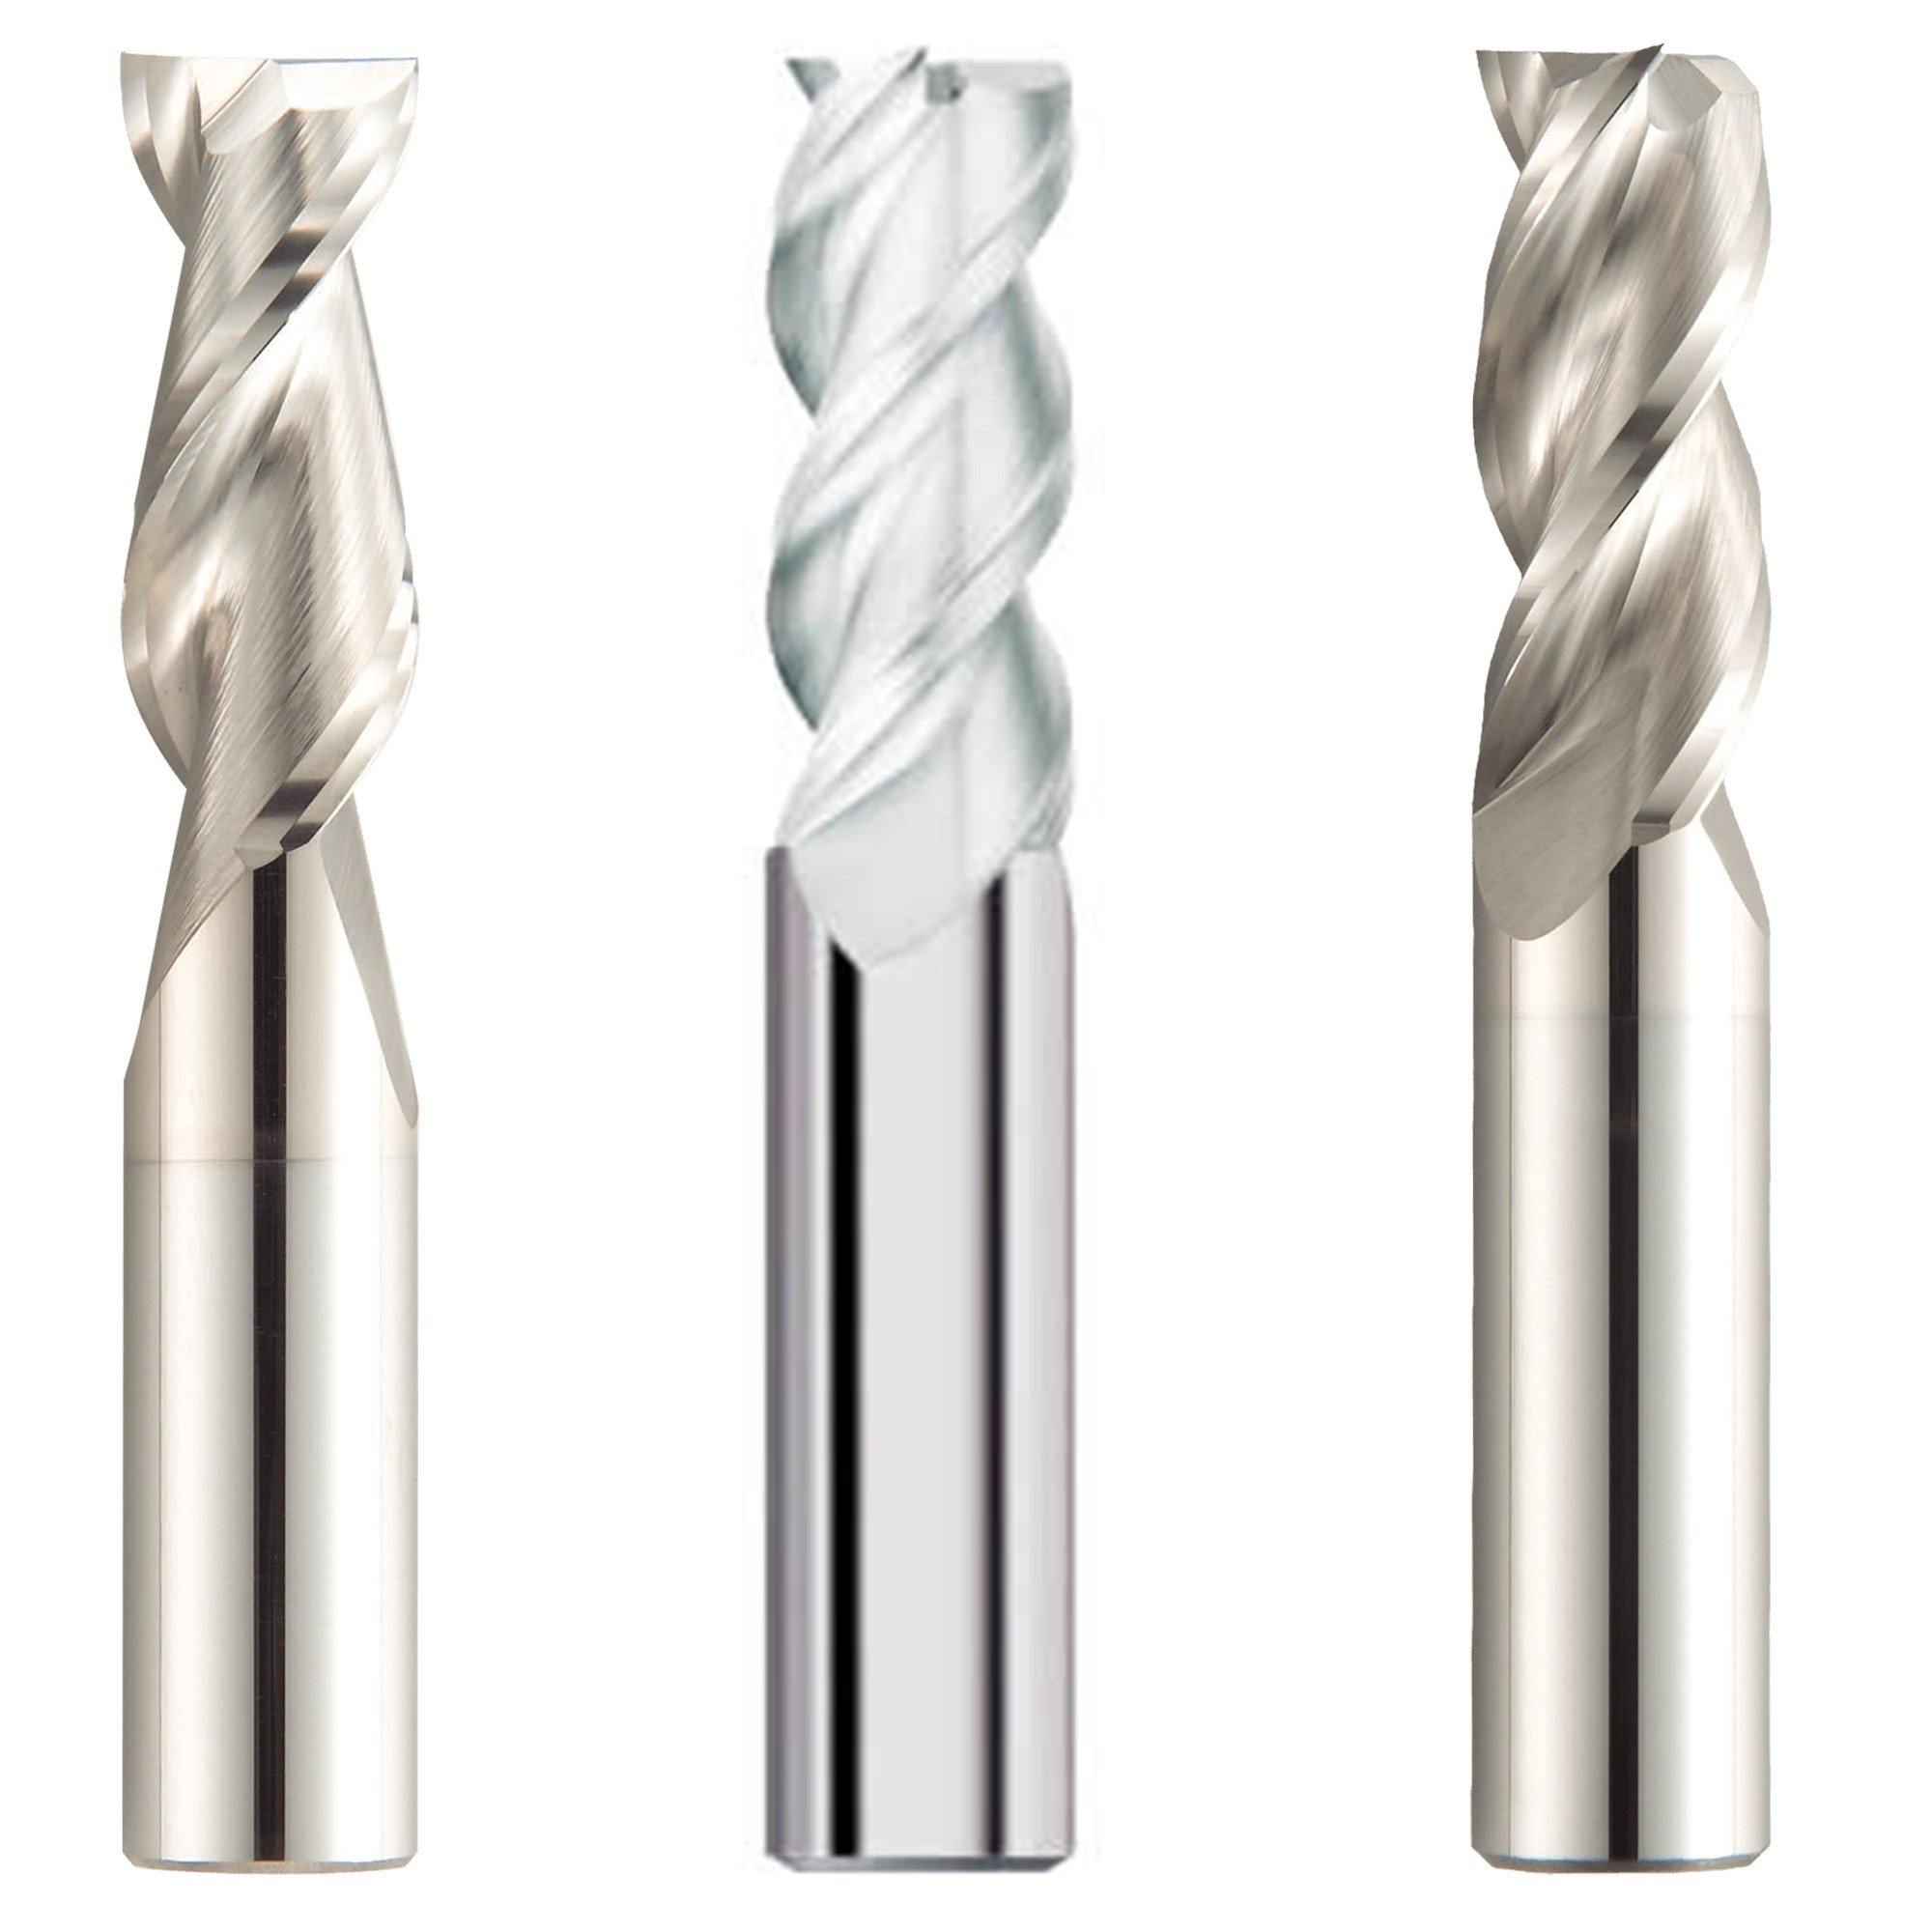 (3 Pack) 3/8" x 1-1/8" x 3" Aluminum HP Carbide End Mills - The End Mill Store 